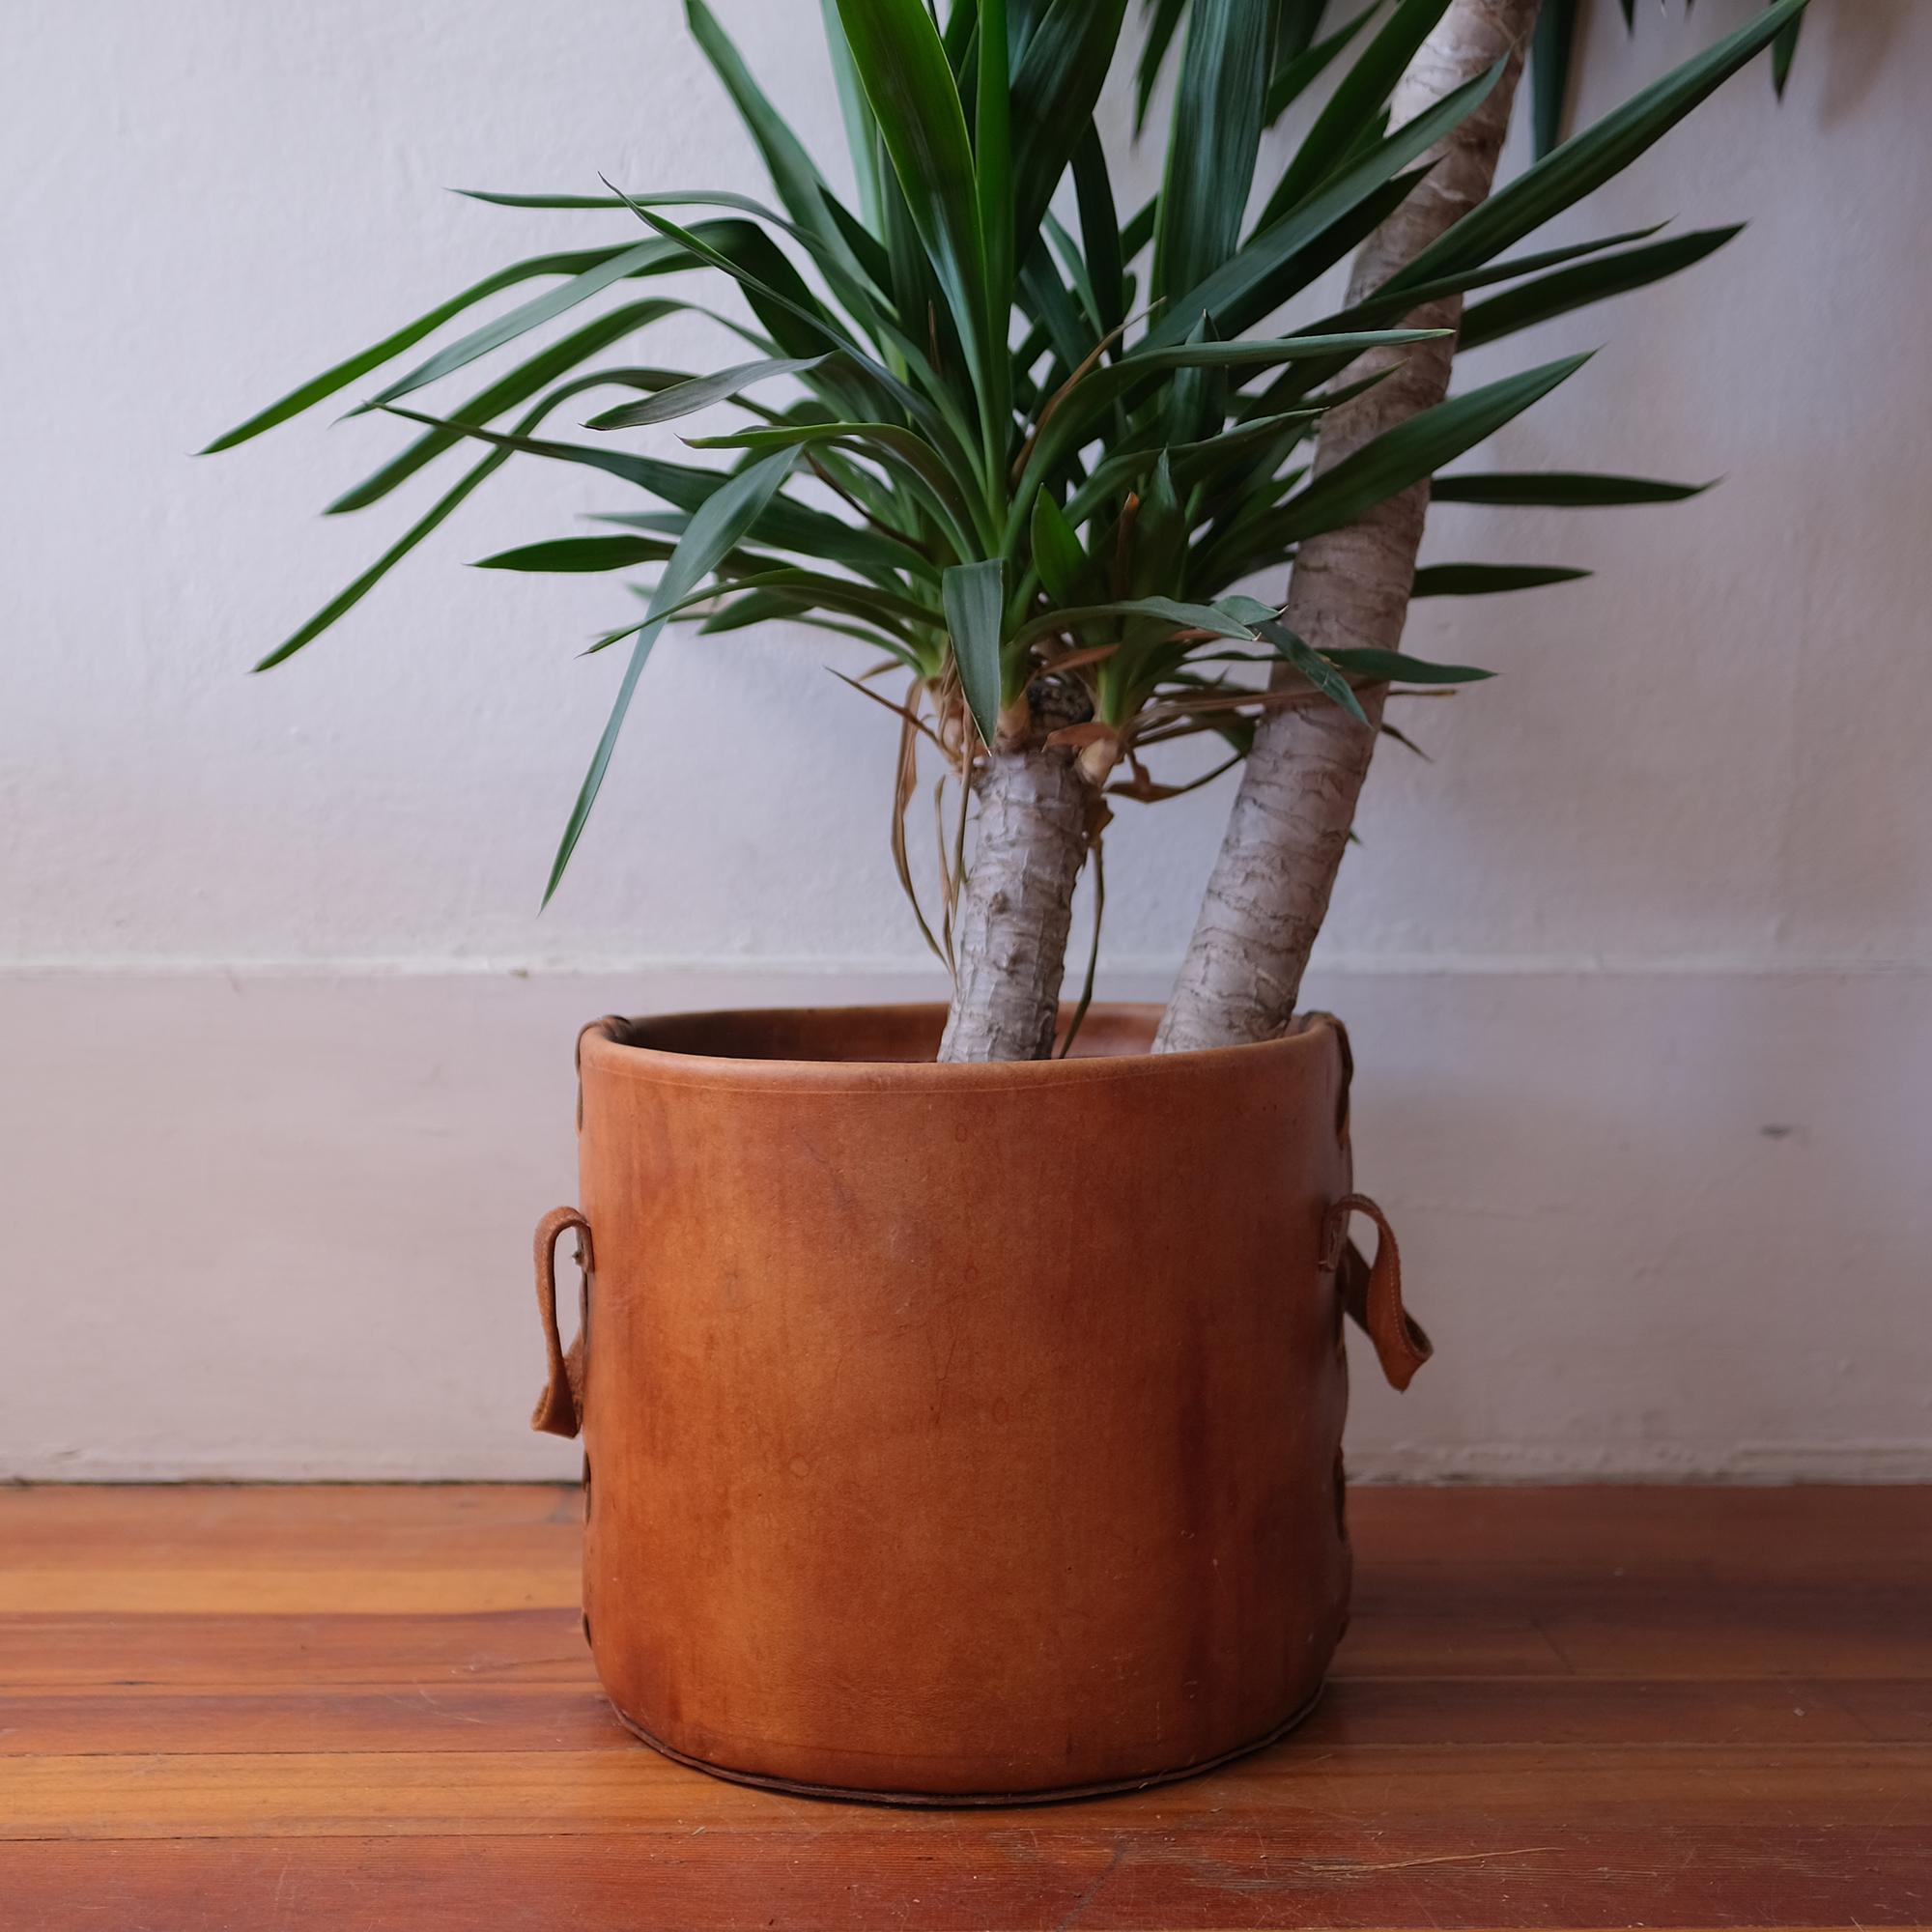 1960s handcrafted leather planter pot cover or trash can. Thick leather with great stitching over a fiberglass liner.